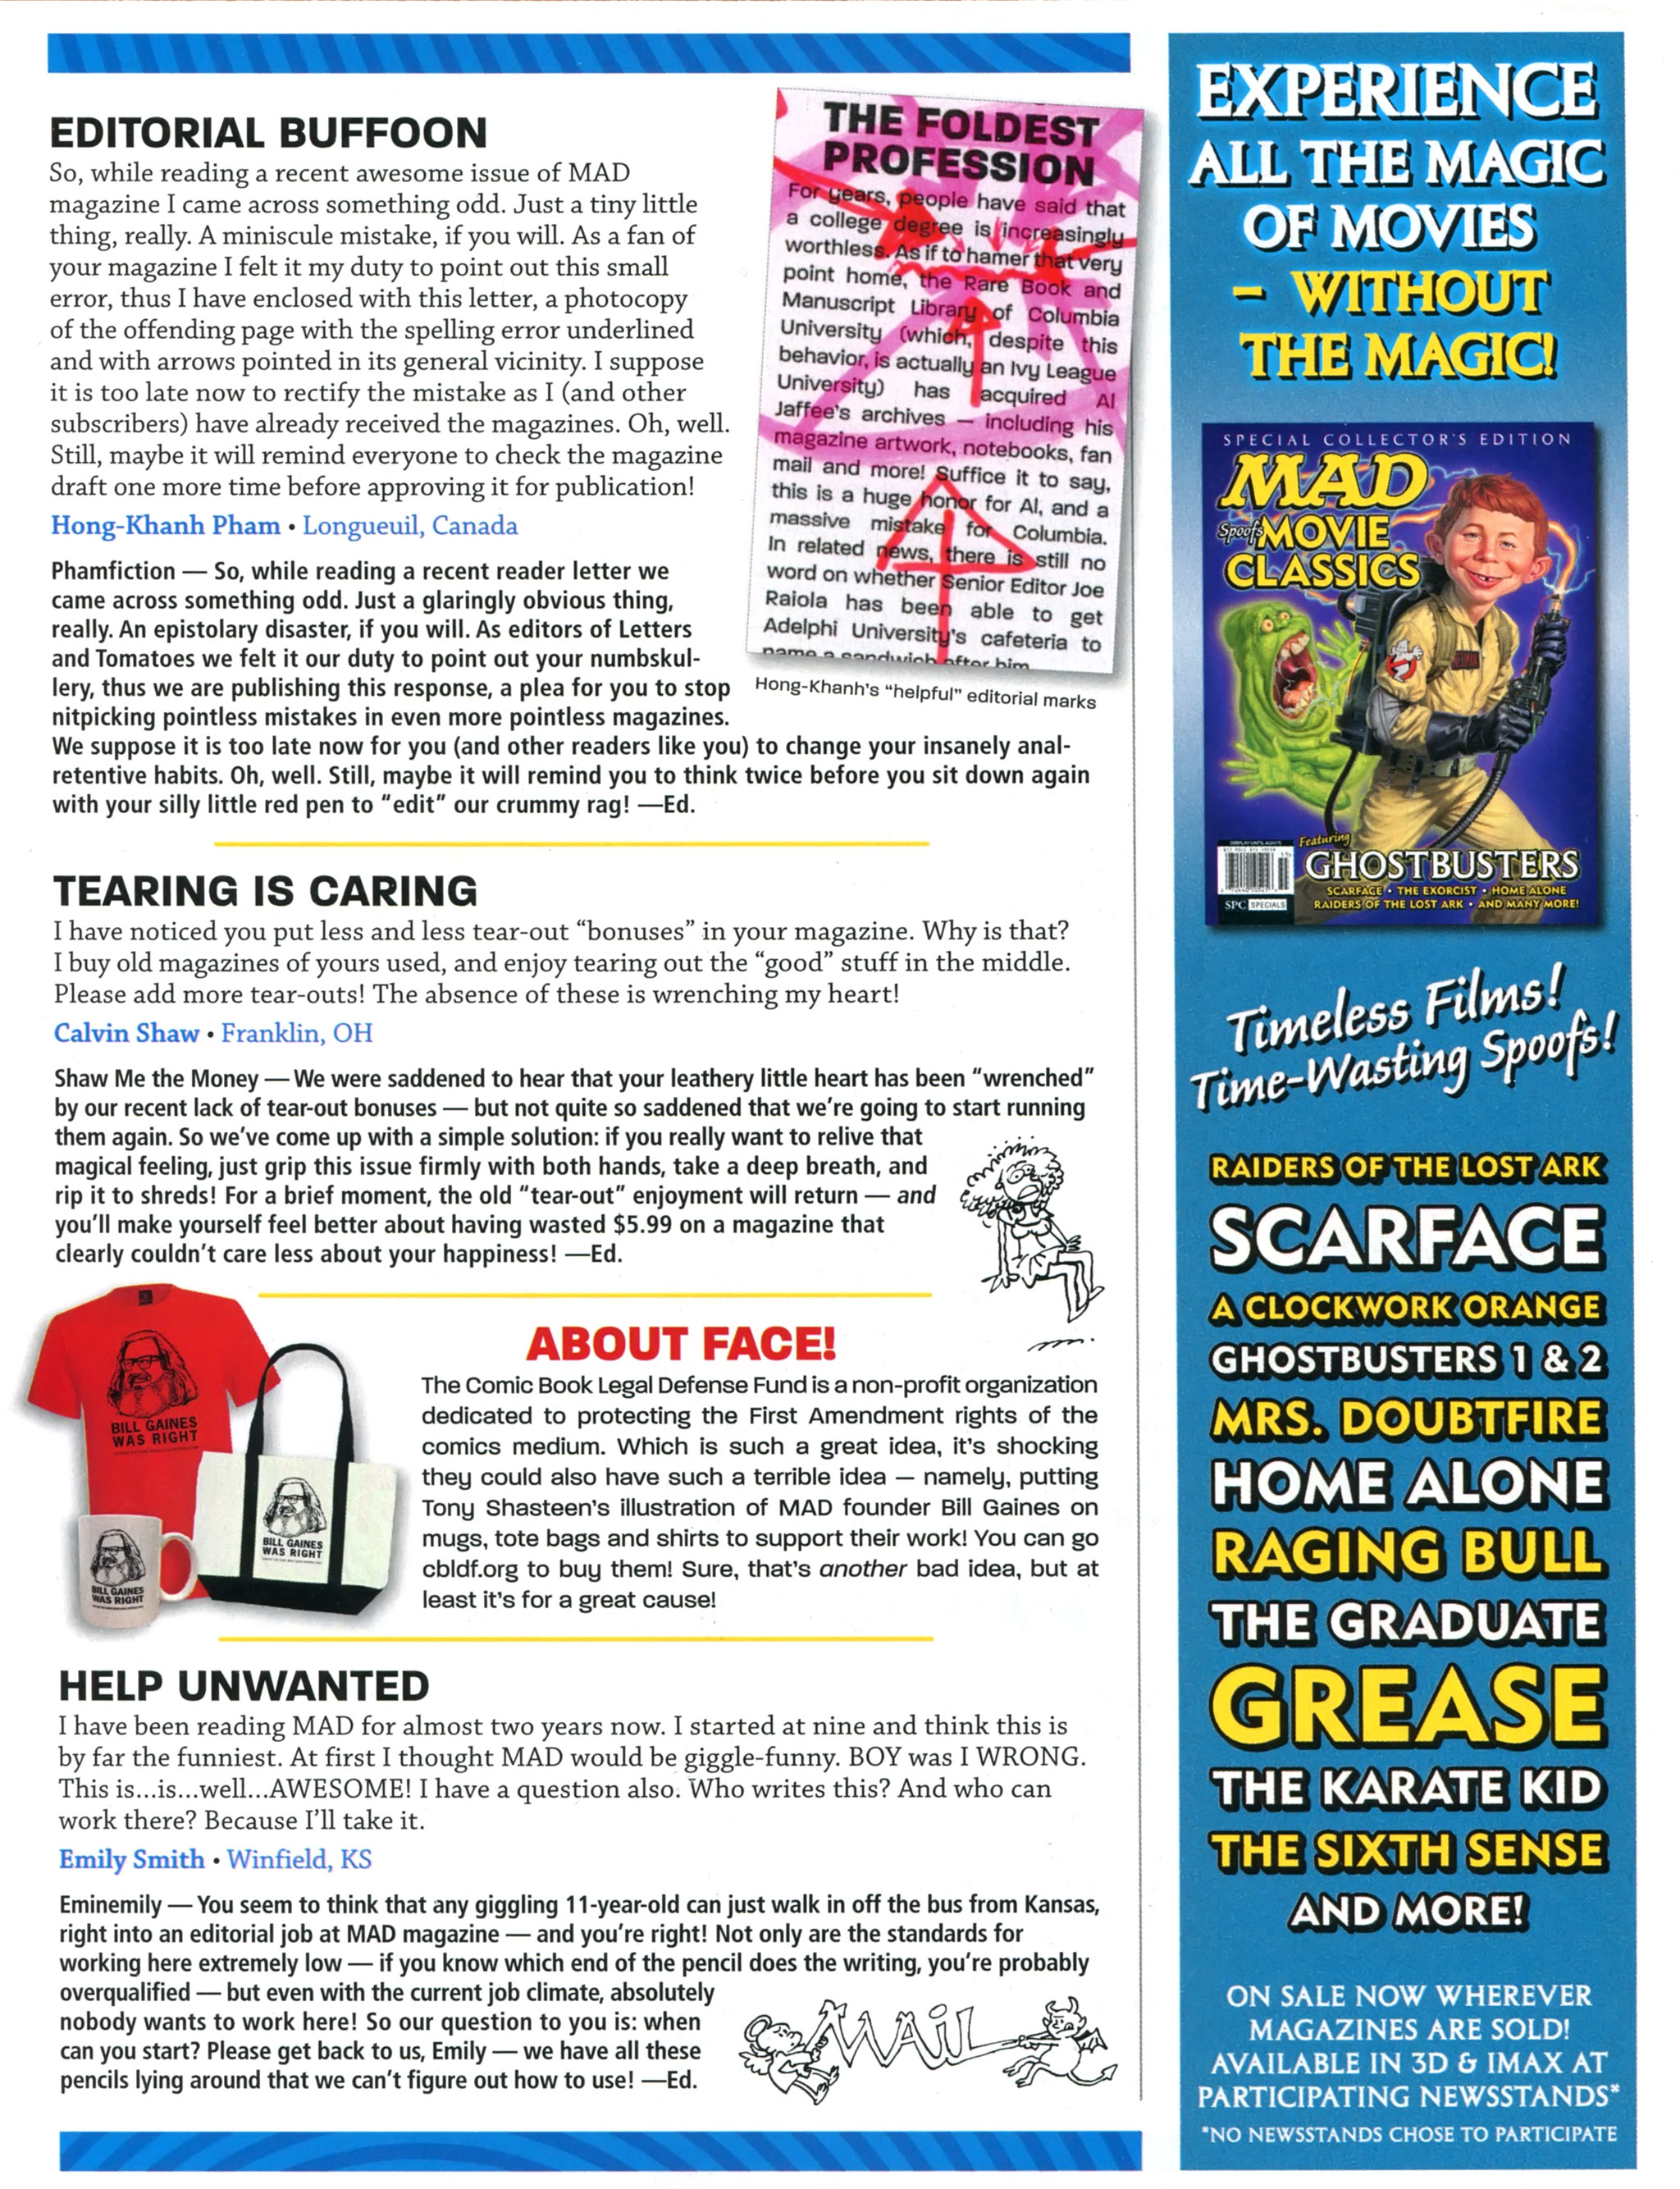 Read online MAD comic -  Issue #532 - 5